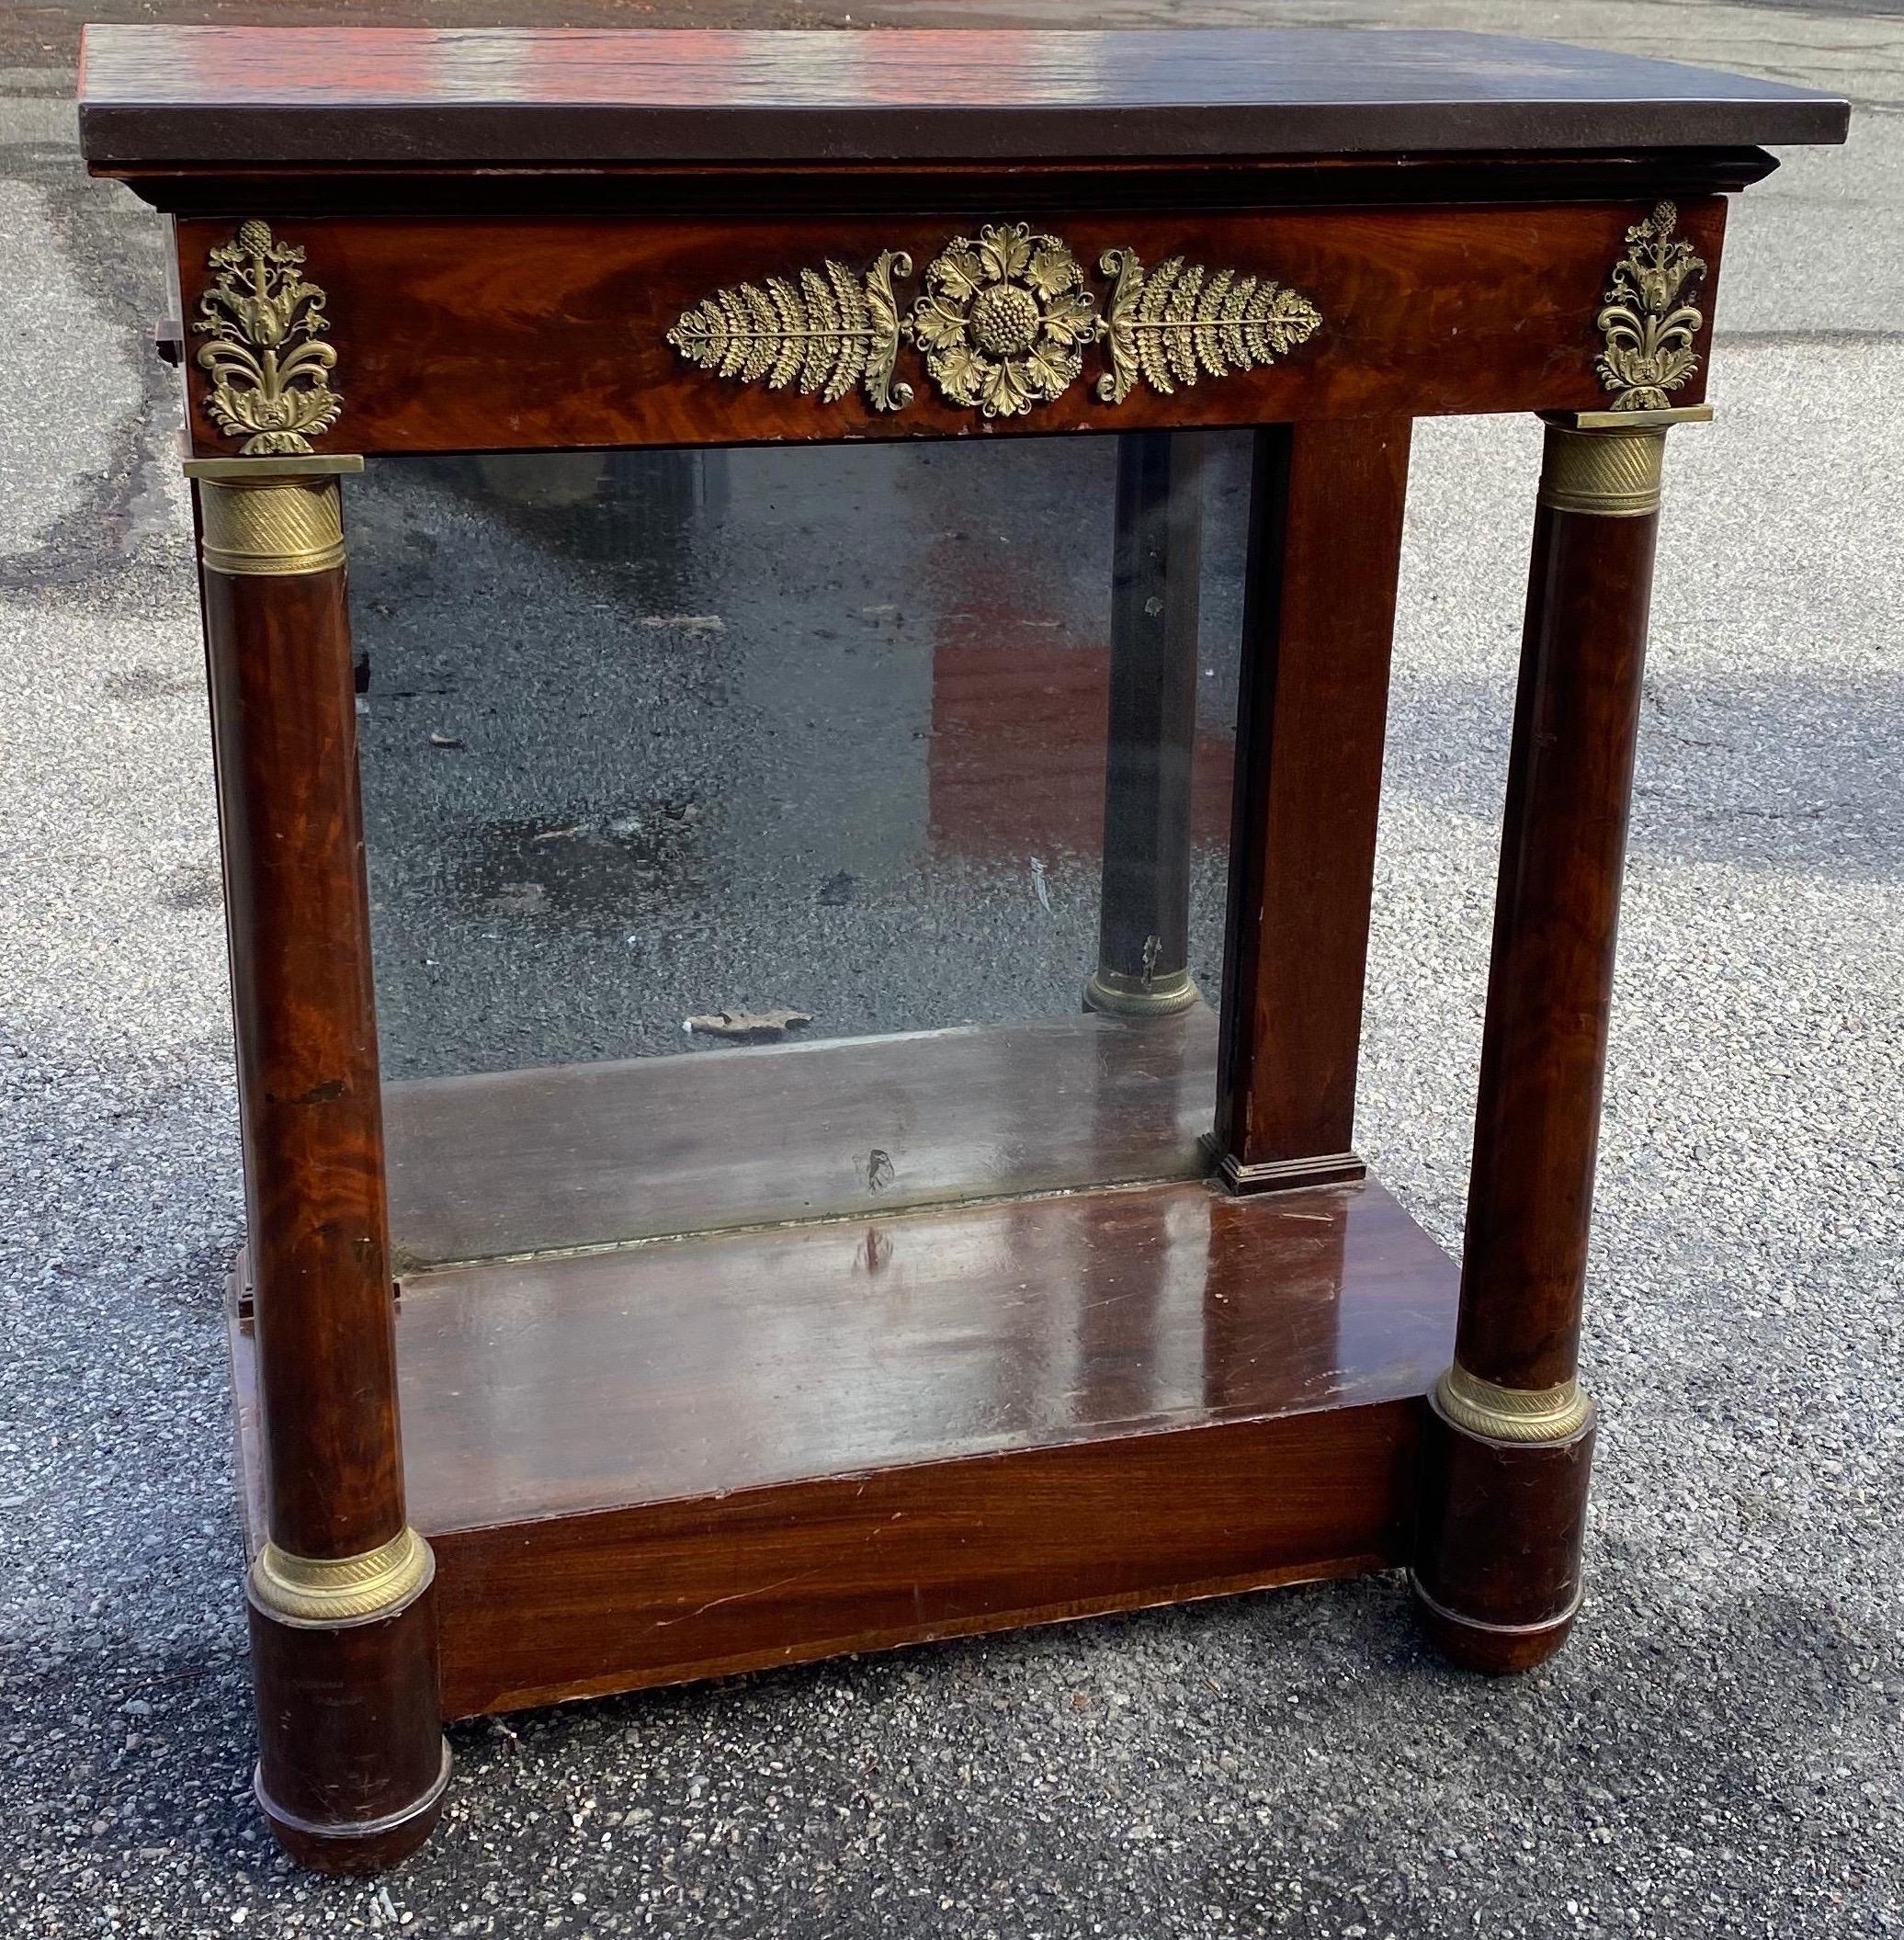 Petite mahogany French empire stone top console with great quality bronze mounts and original mirror. Single drawer.